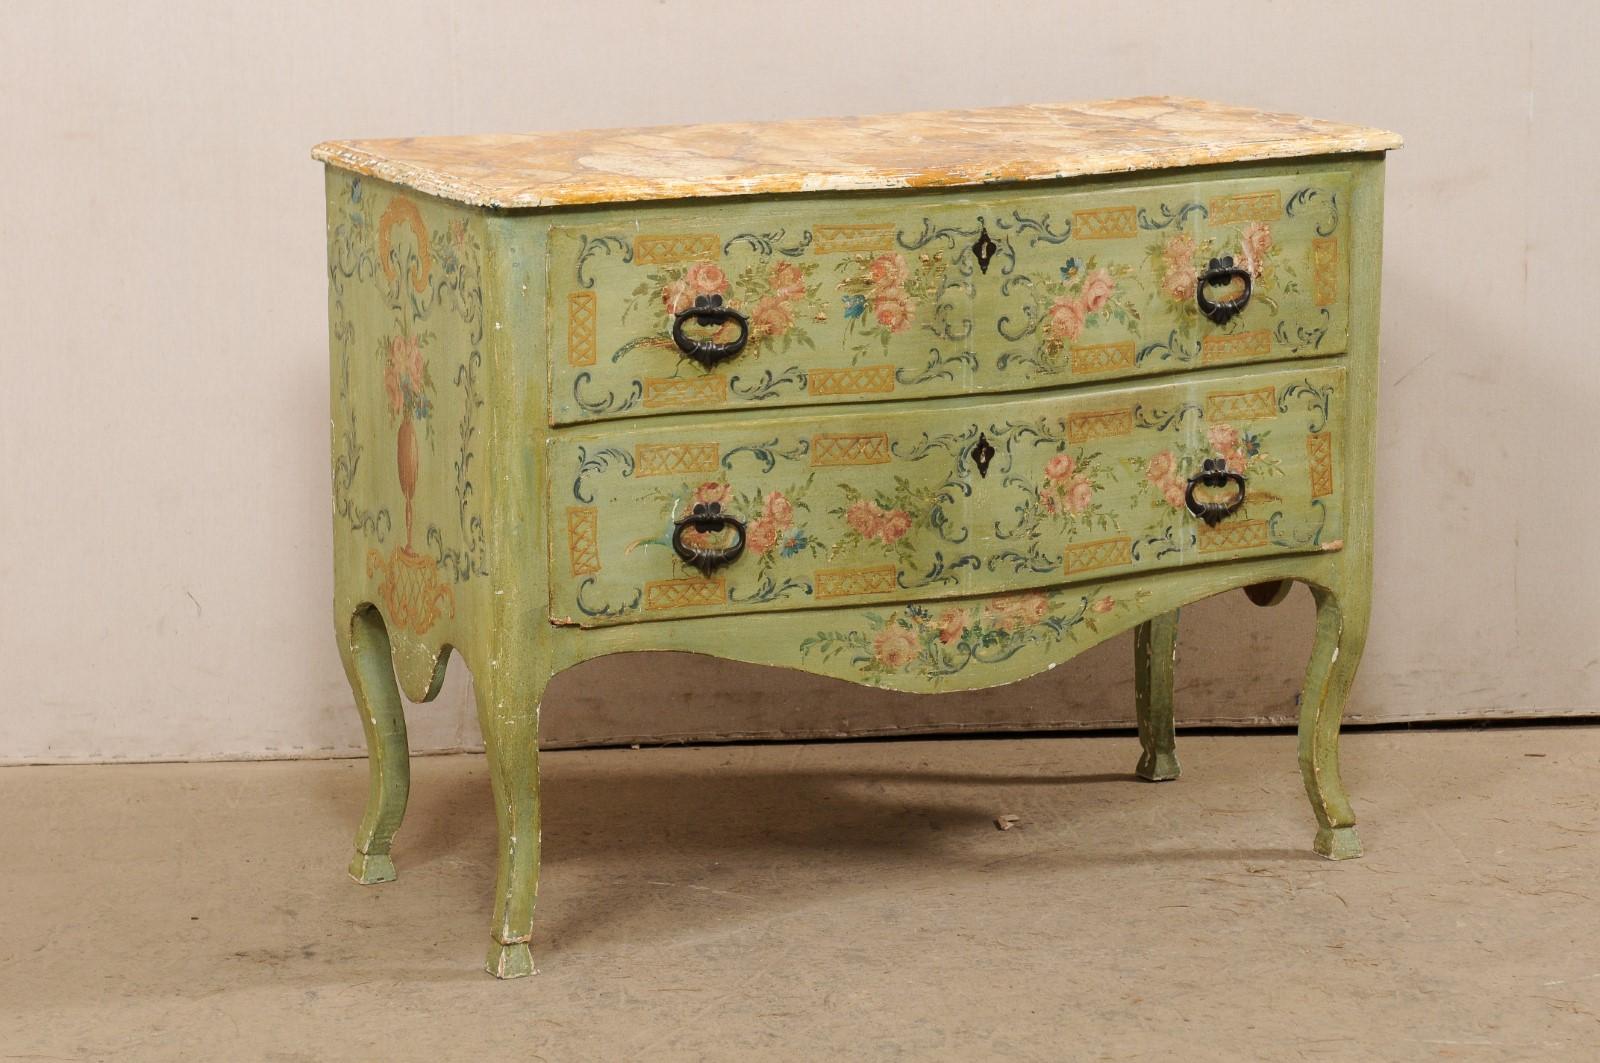 An Italian hand-painted raised chest, with subtle serpentine body, from the early 19th century. This antique chest from Italy is ornately decorated in a hand-painted floral, lattice, and urn motif about the front and sides. The commode has a nice